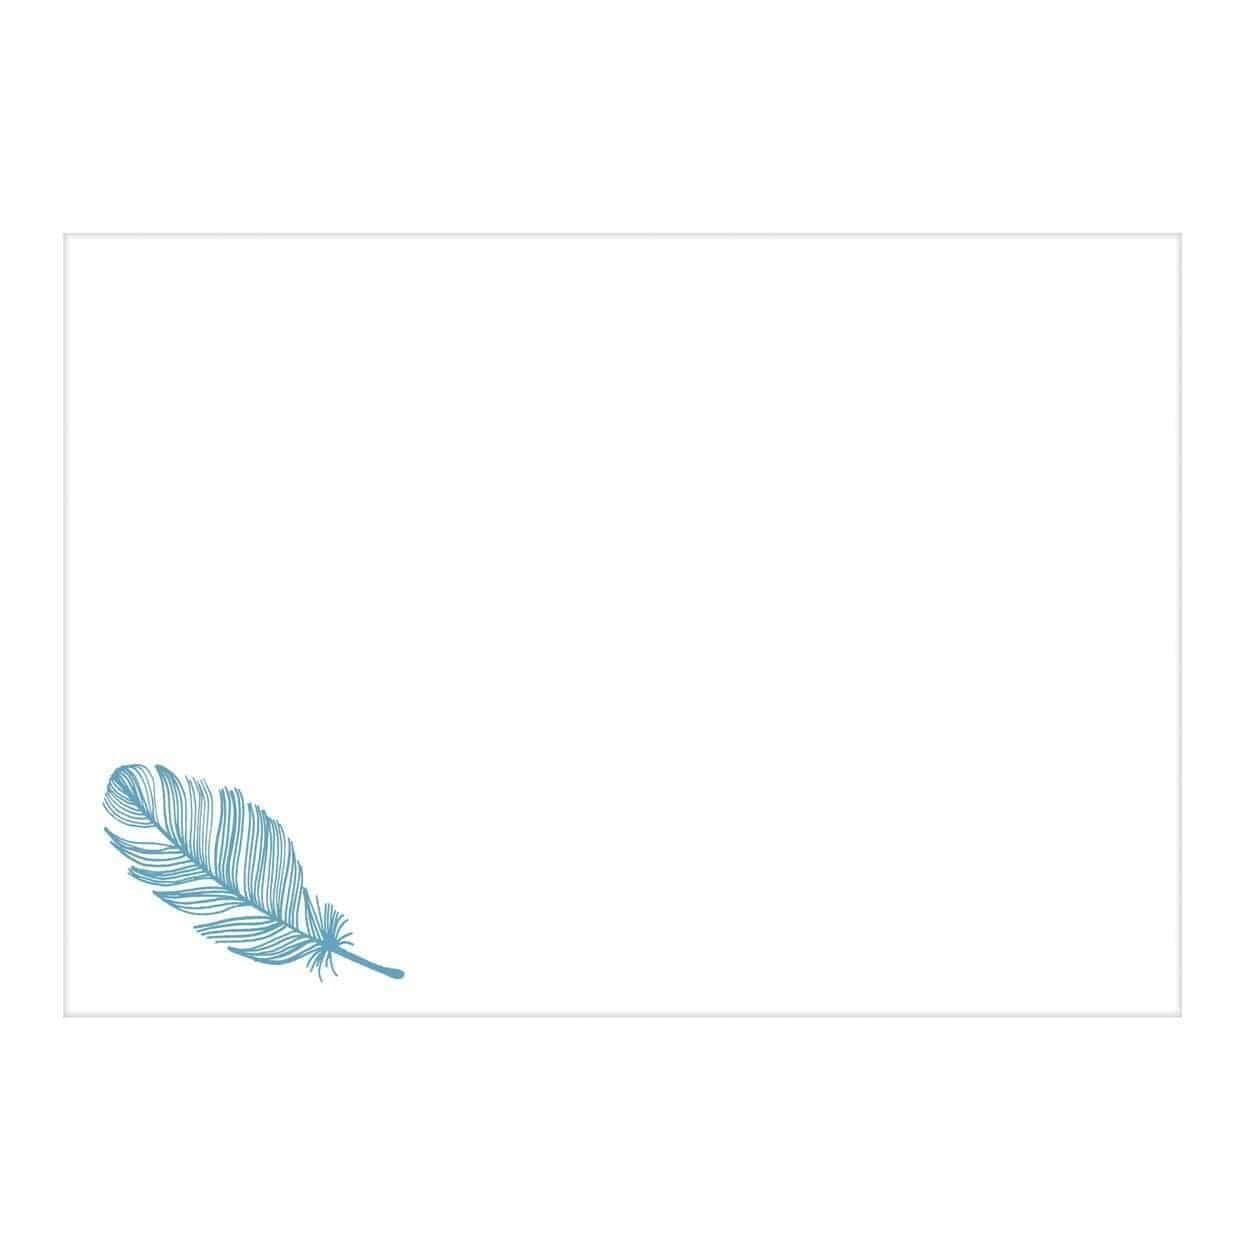 Ashley Woodson Bailey Greeting Assortment Notecard Set Ashley Woodson Bailey Greeting Assortment Notecard Set Arrows & Feathers Parcel Thank You Notecards 